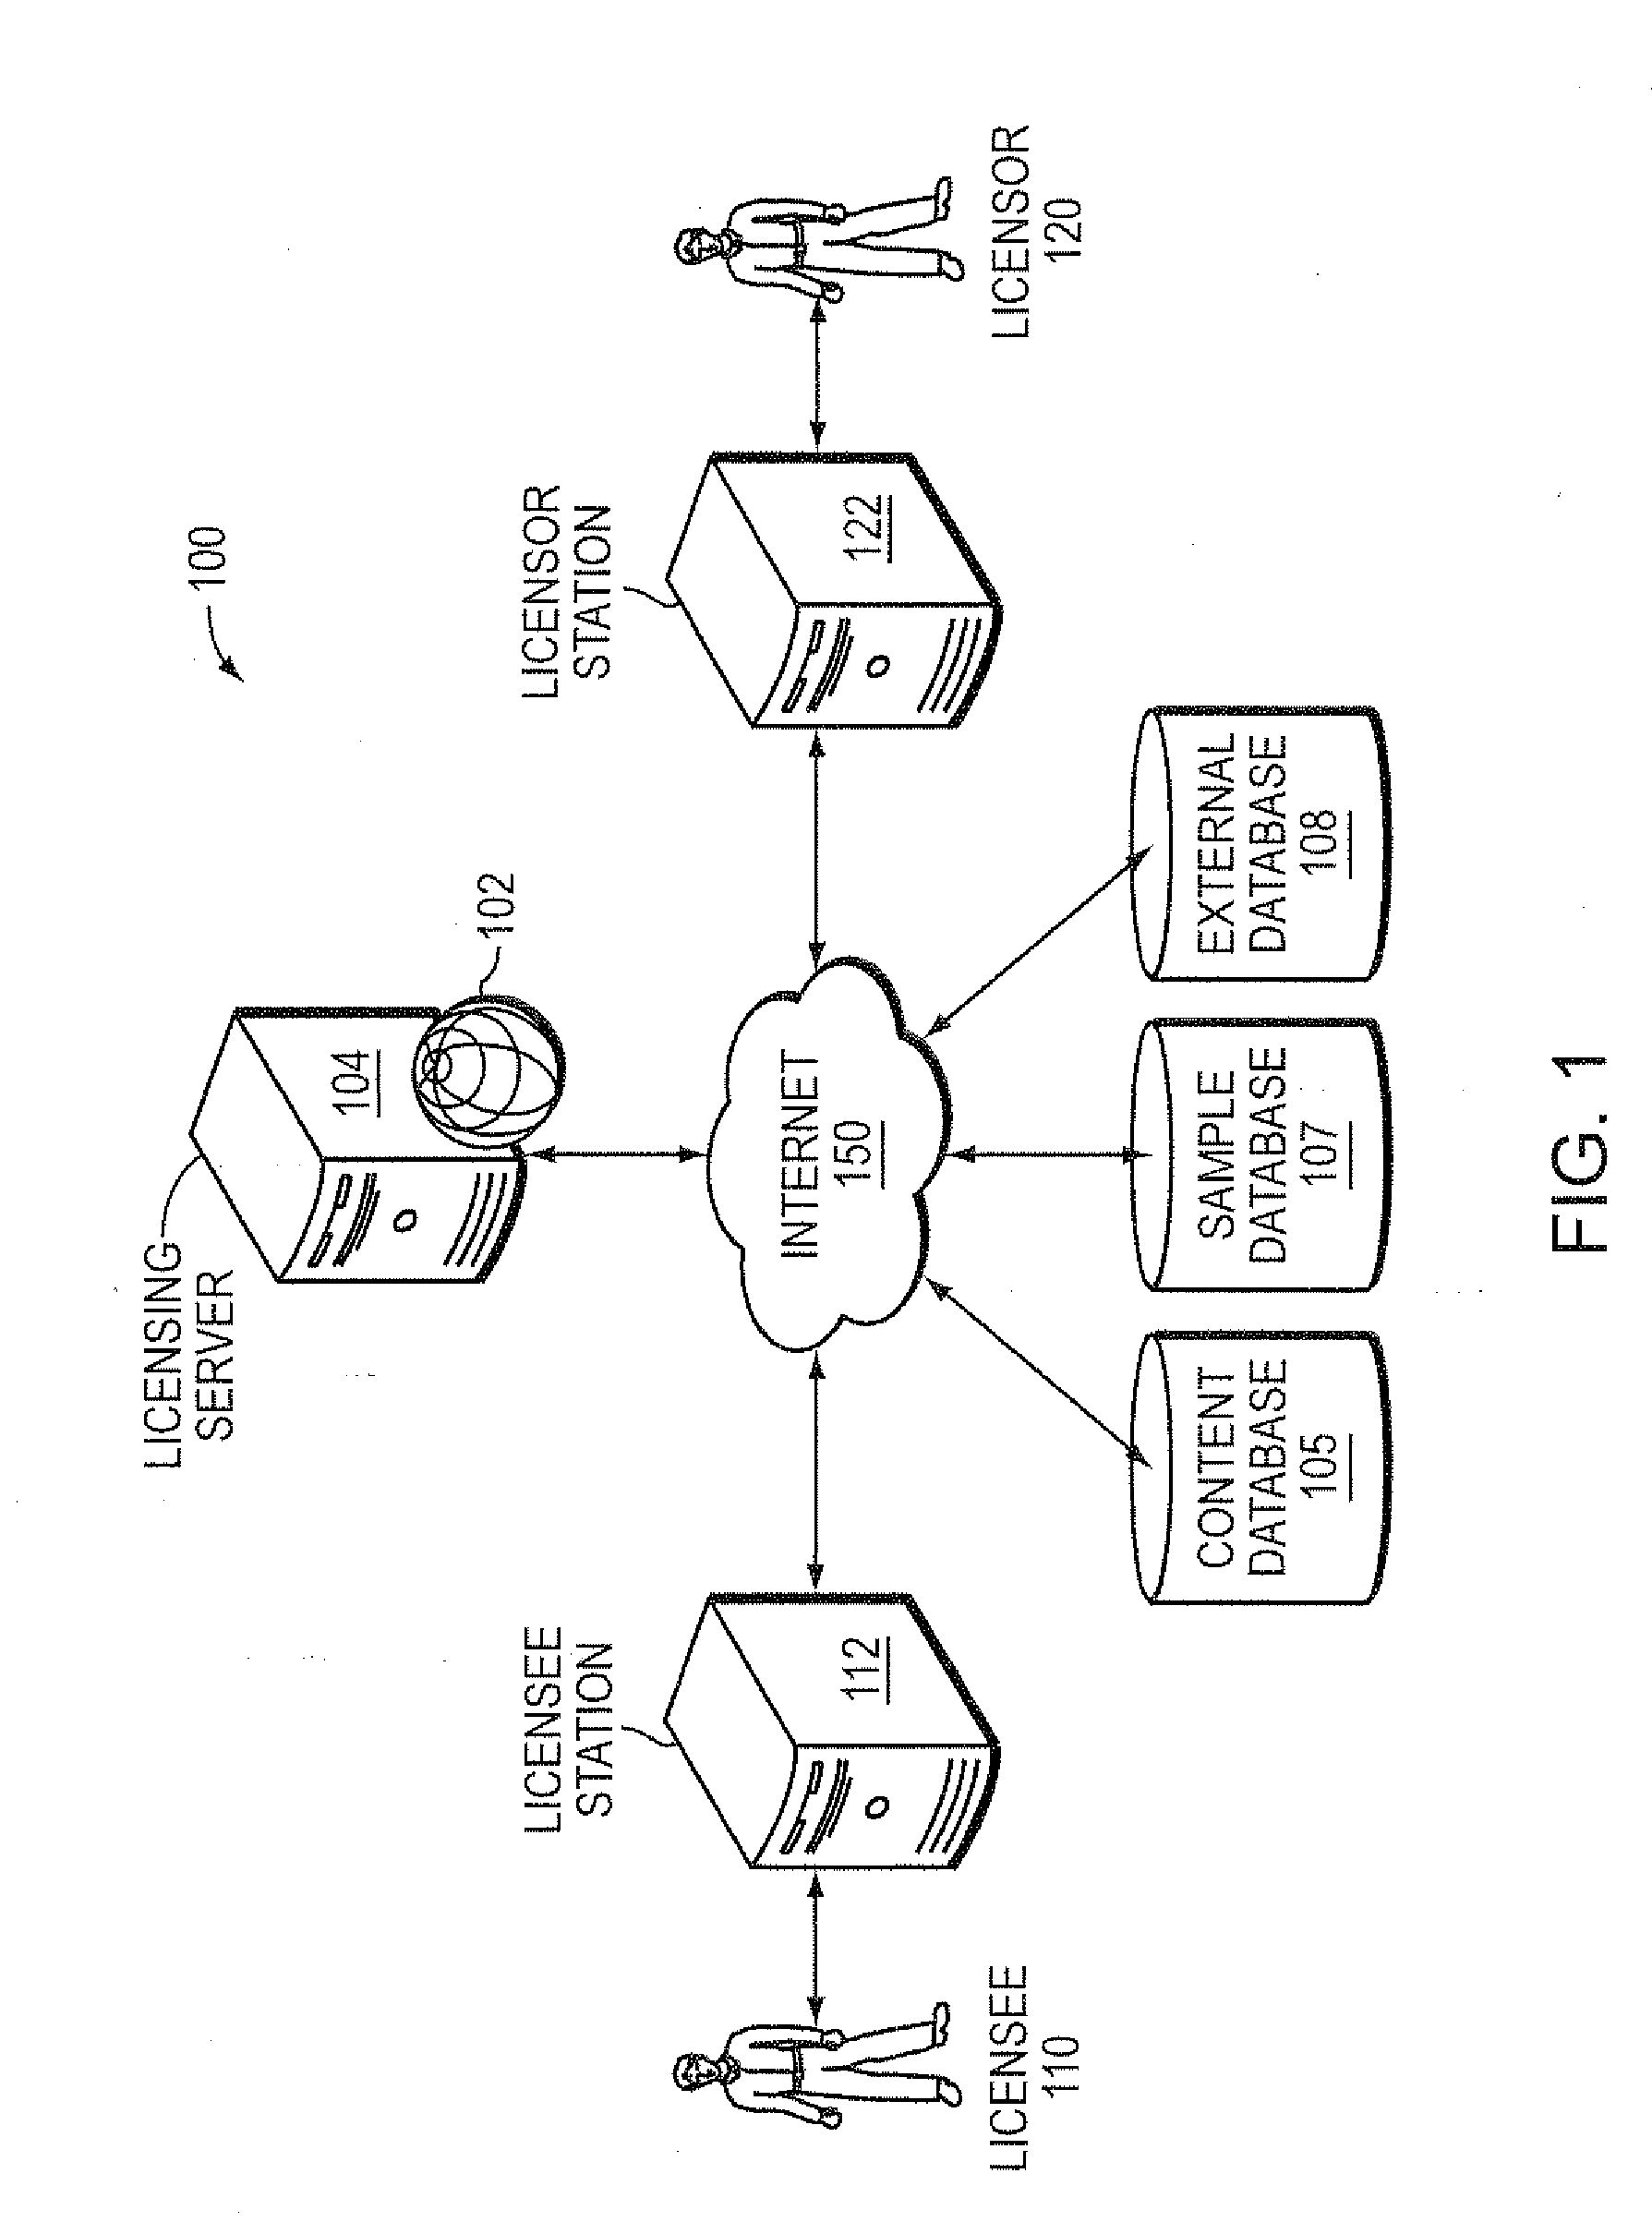 Multi-Computer Data Transfer and Processing to Support Electronic Content Clearance and Licensing